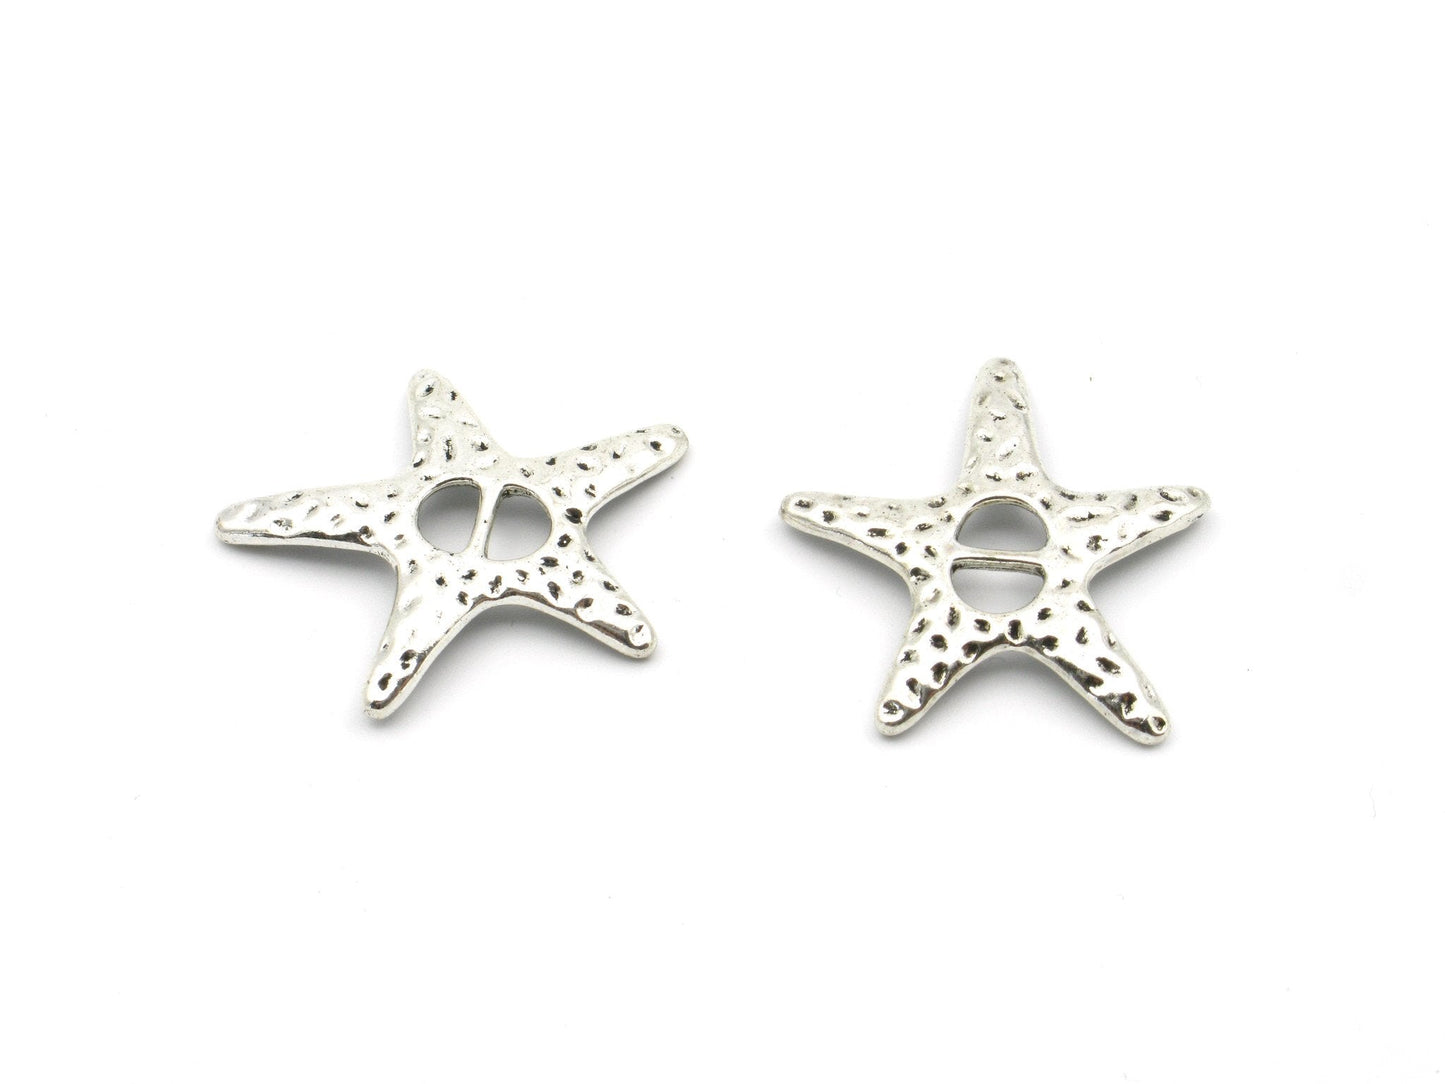 10 Pcs For 5mm flat leather,Antique Silver Sea star jewelry supplies jewelry finding D-1-5-12